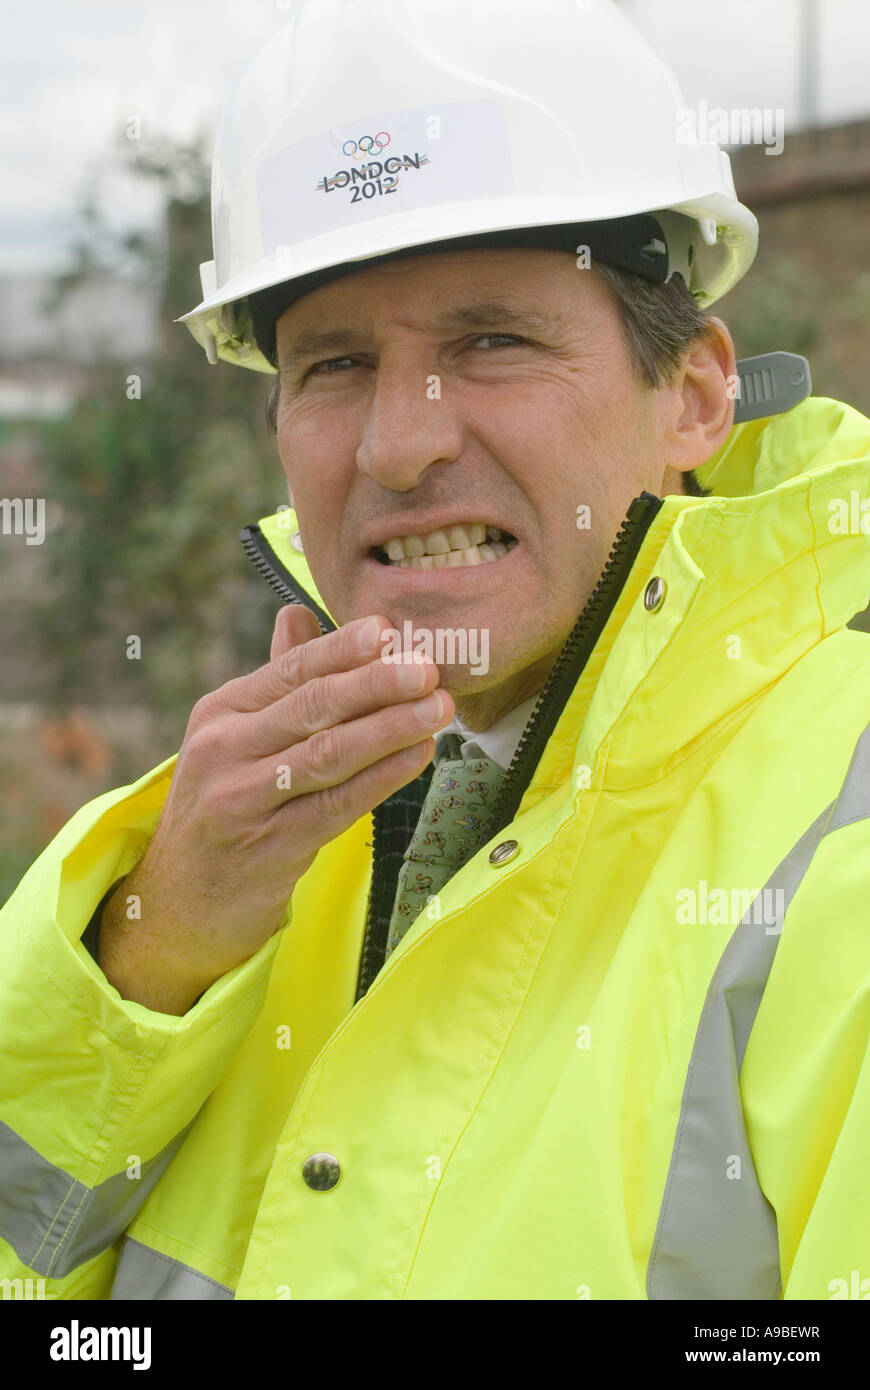 Lord Seb Sebastian Coe portrait looking worried in hard hat East London Lee Valley site of the 2012 Olympic Games 2007 HOMER SYKES Stock Photo